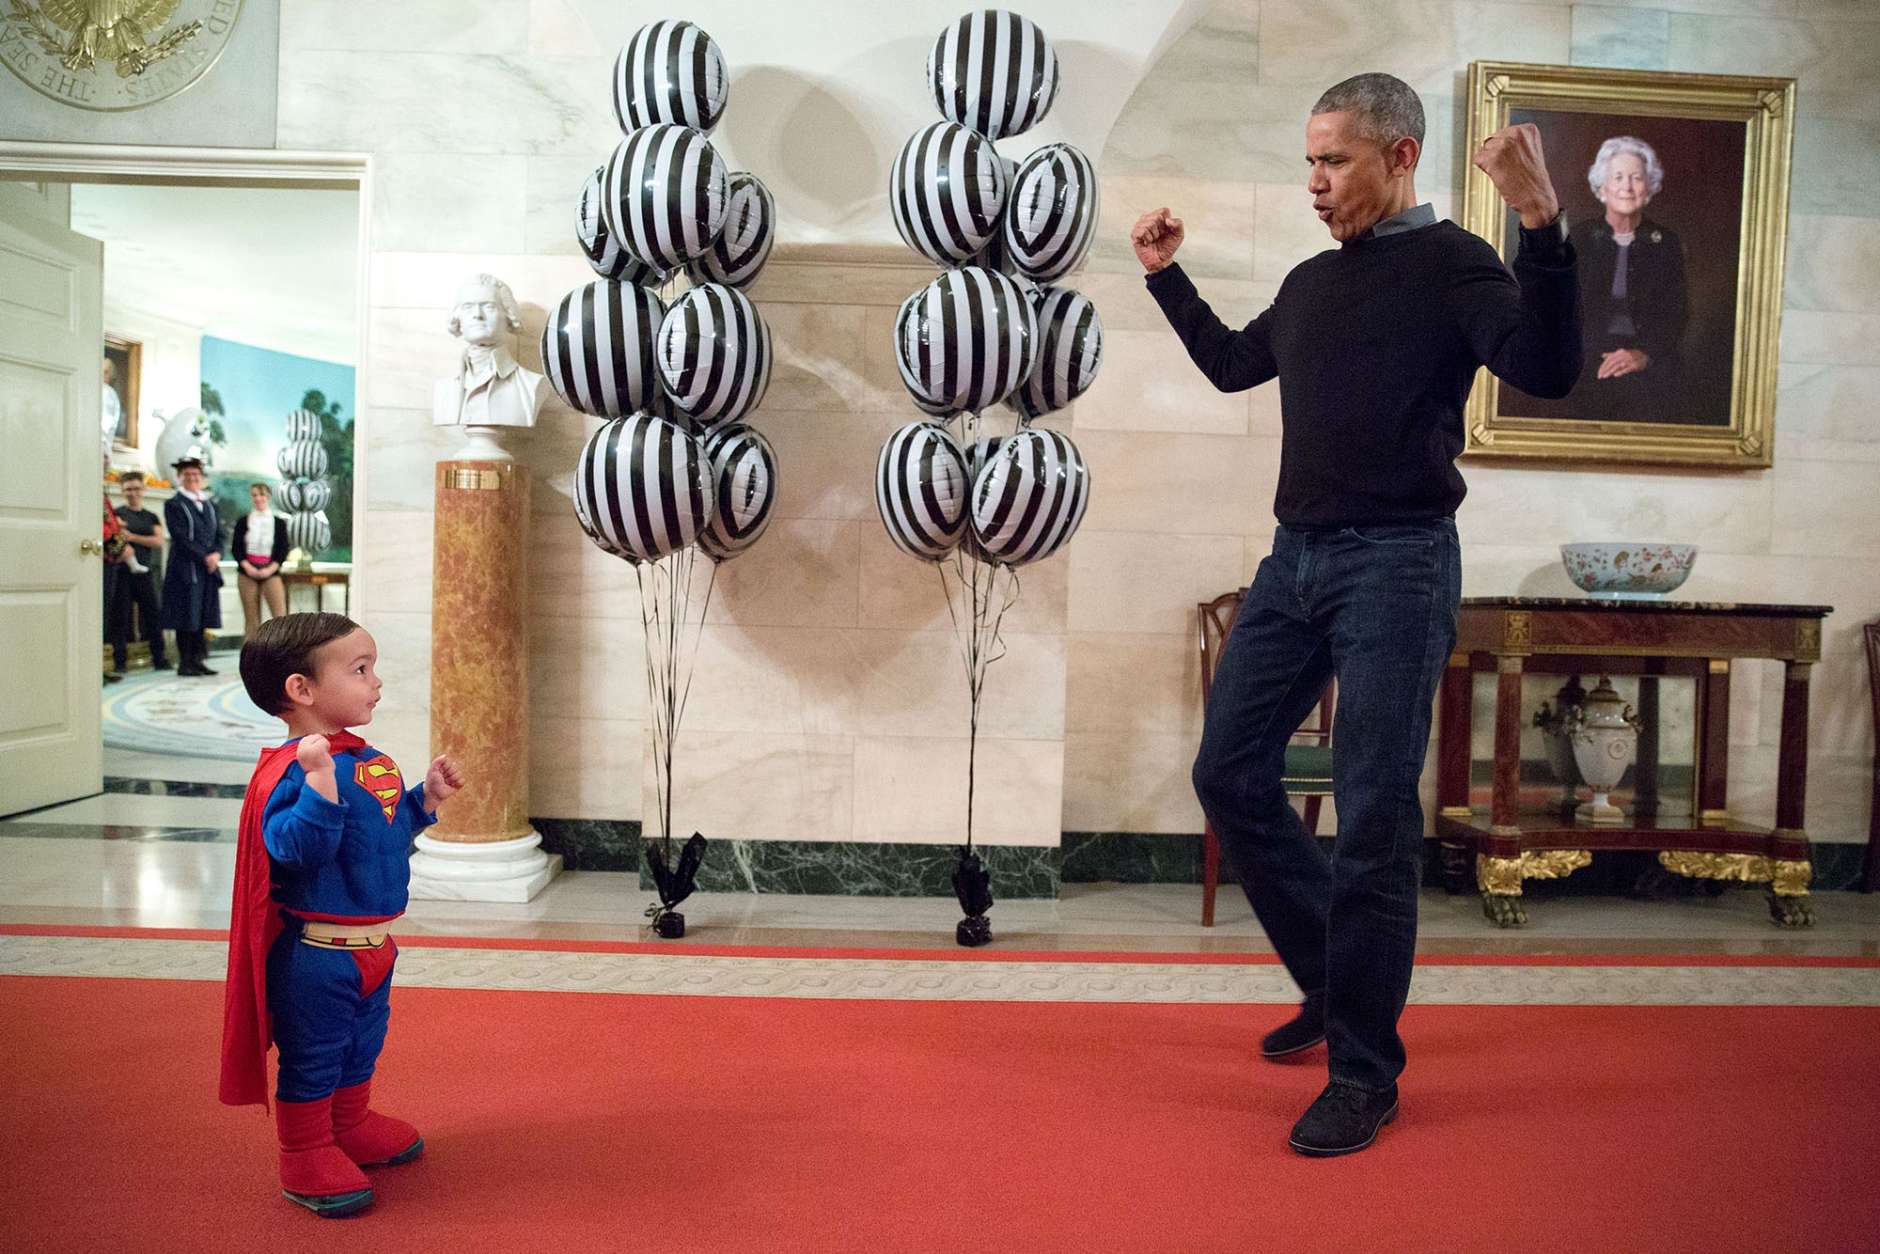 Oct. 31, 2016
“The President was about to welcome local children for Halloween trick-or-treating when he ran into Superman Walker Earnest, son of Press Secretary Josh Earnest, in the Ground Floor Corridor of the White House. ‘Flex those muscles,’ he said to Walker.” (Official White House Photo by Pete Souza)